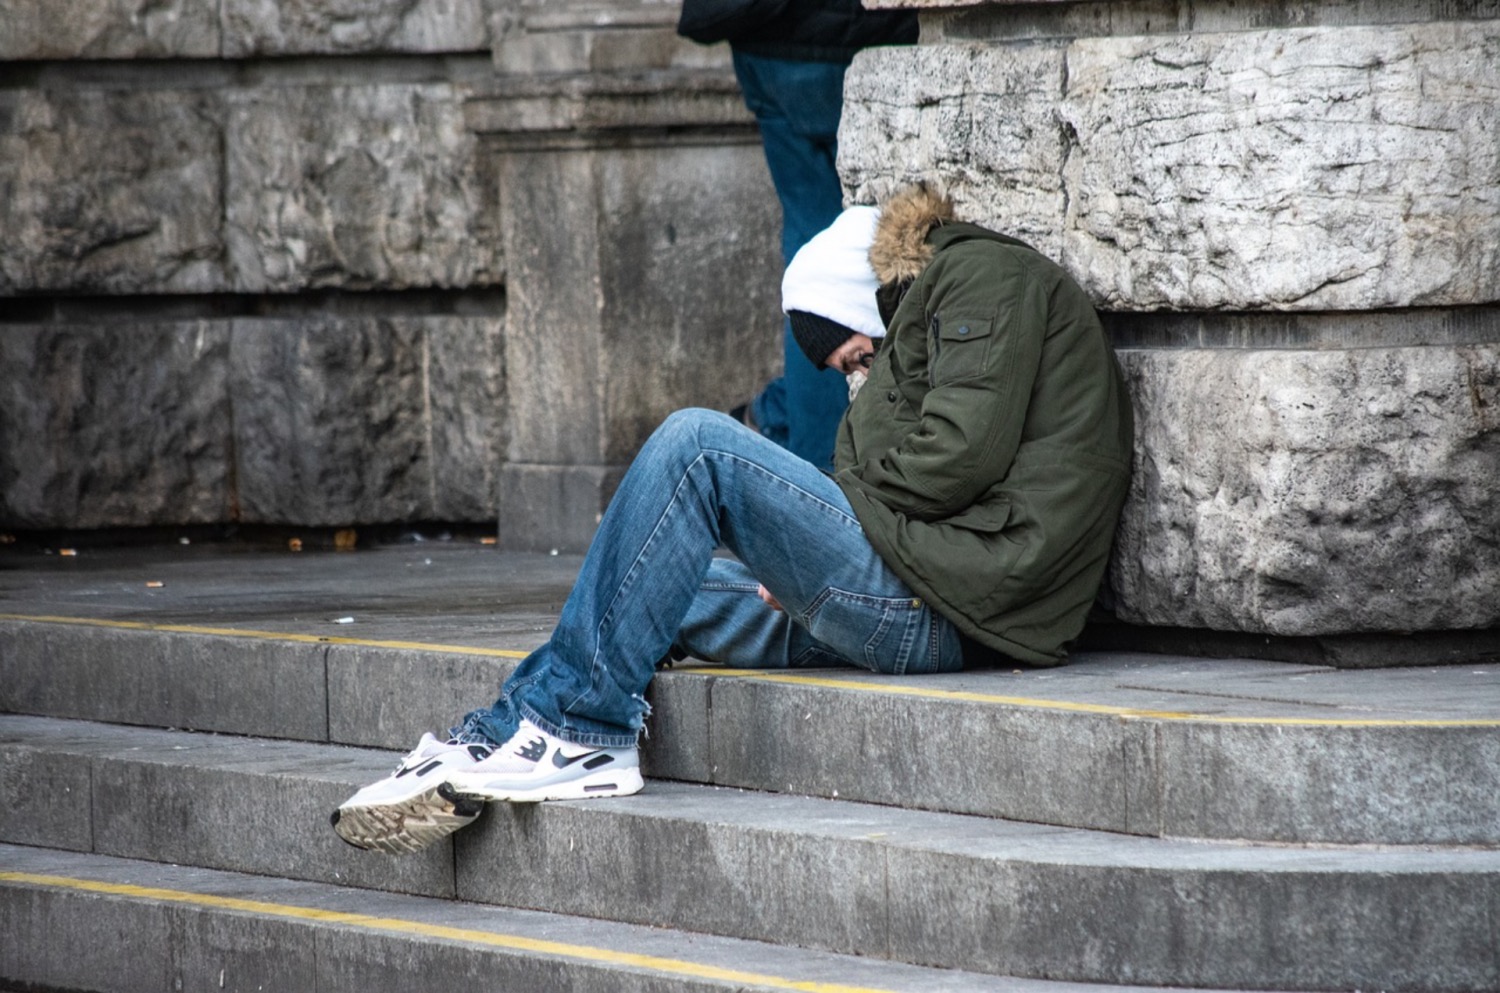 A man in jeans and a parker jacket crouched on a concrete step leaning up against a stone wall